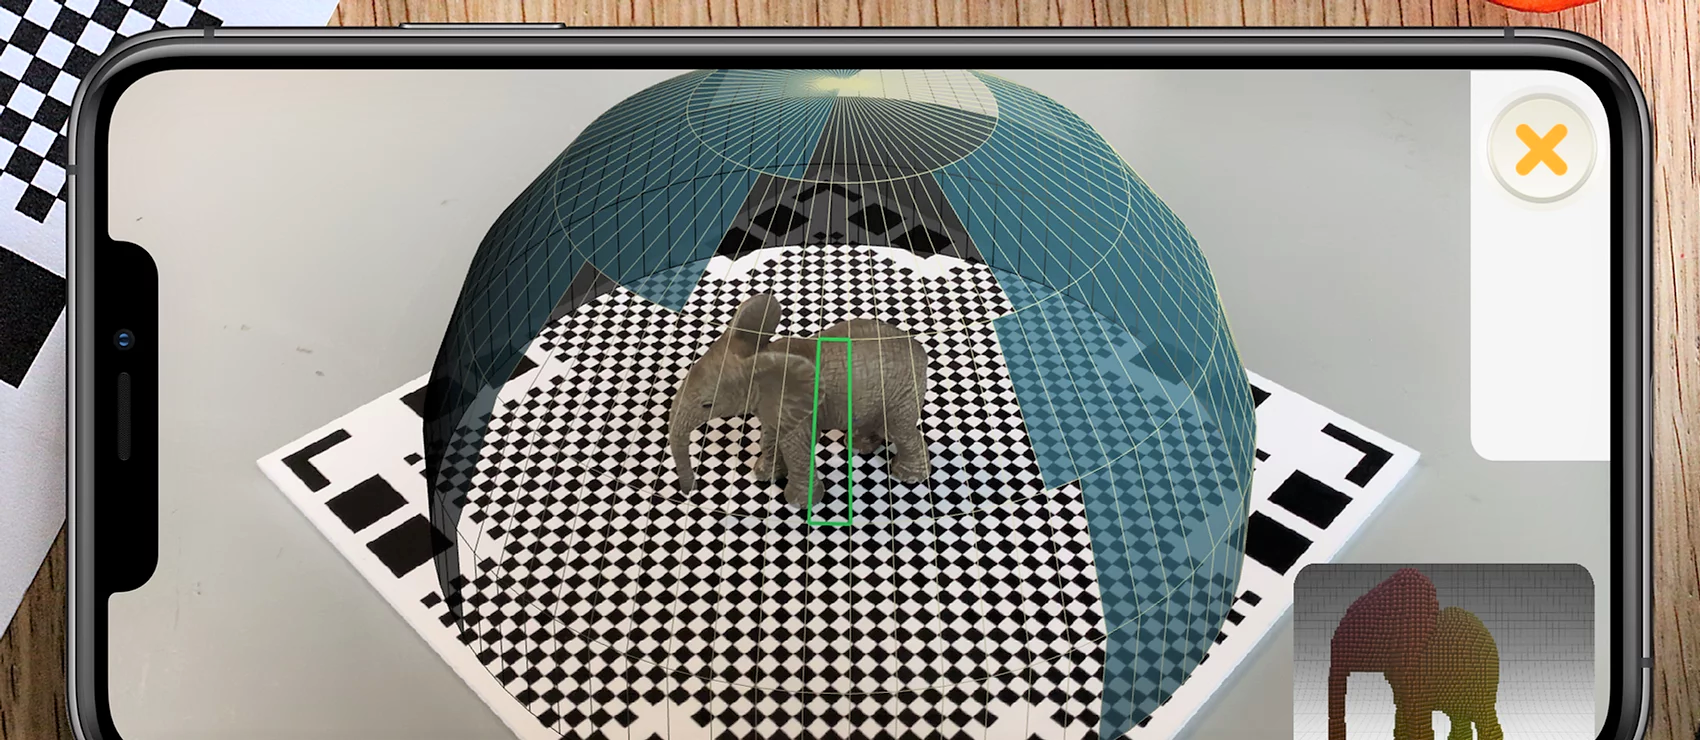 A screenshot of the scanning process within the Qlone app. Each slice in the hemisphere represents a single capture of the model. A slice becomes transparent once the image has been taken successfully. A capture is only successful when the software determines the angle and distance from the model are appropriate. This process is done twice, flipping the model between scans so the bottom surface is visible.